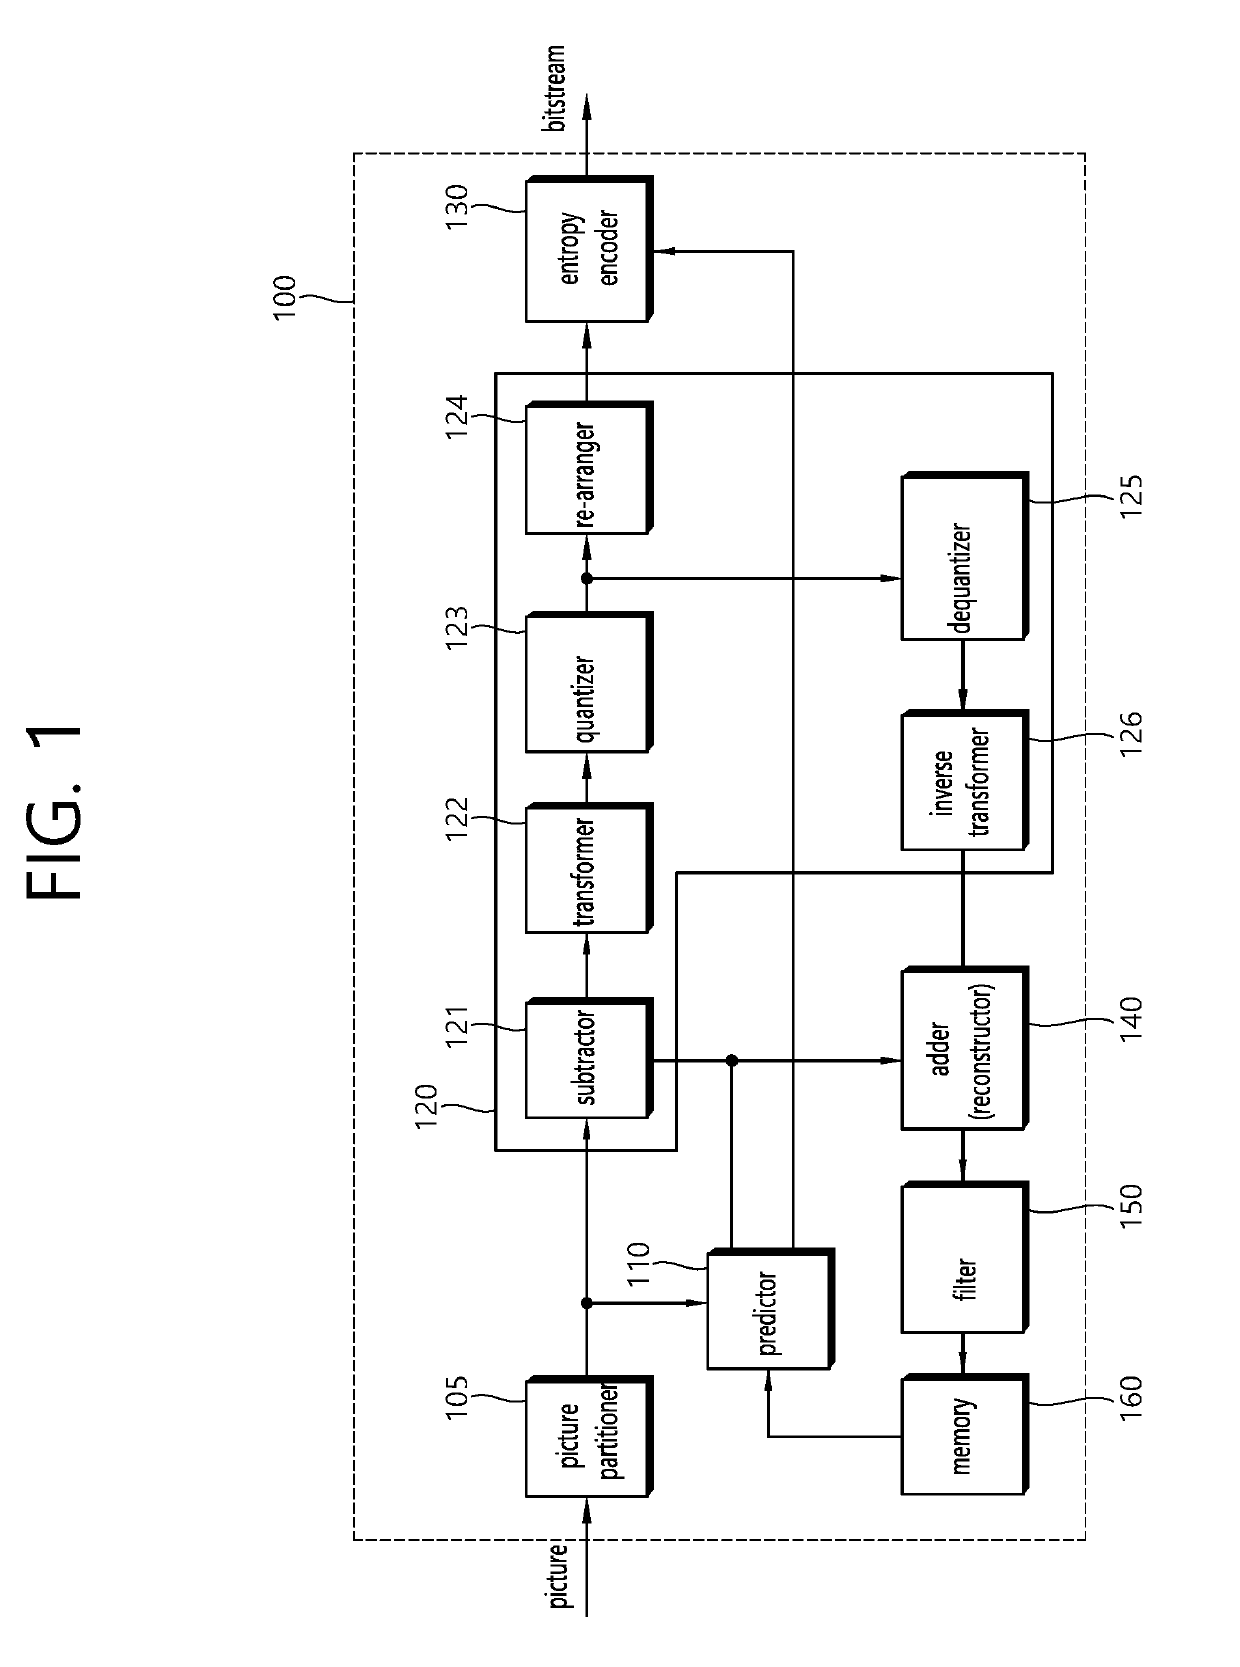 Illumination compensation-based inter-prediction method and apparatus in image coding system